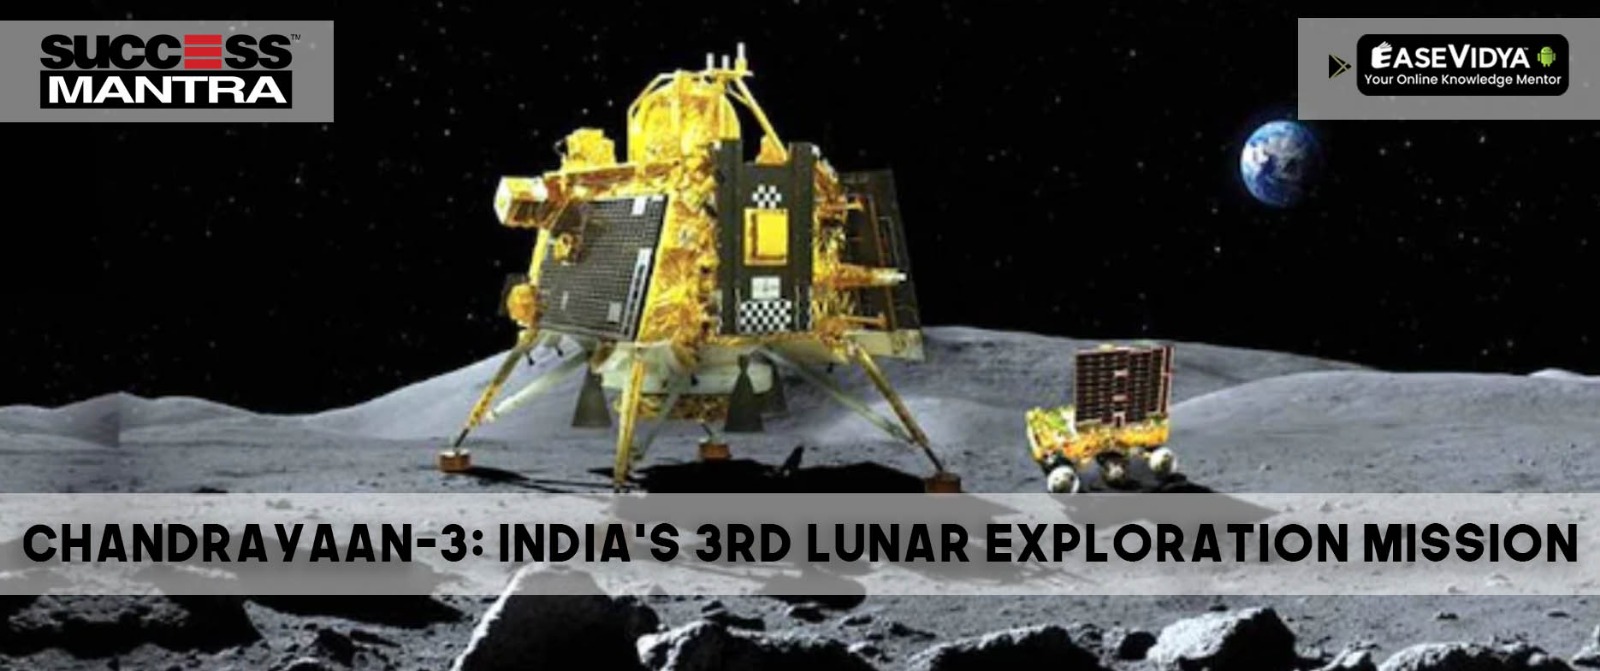 Chandrayaan-3: India's 3rd Lunar Exploration Mission